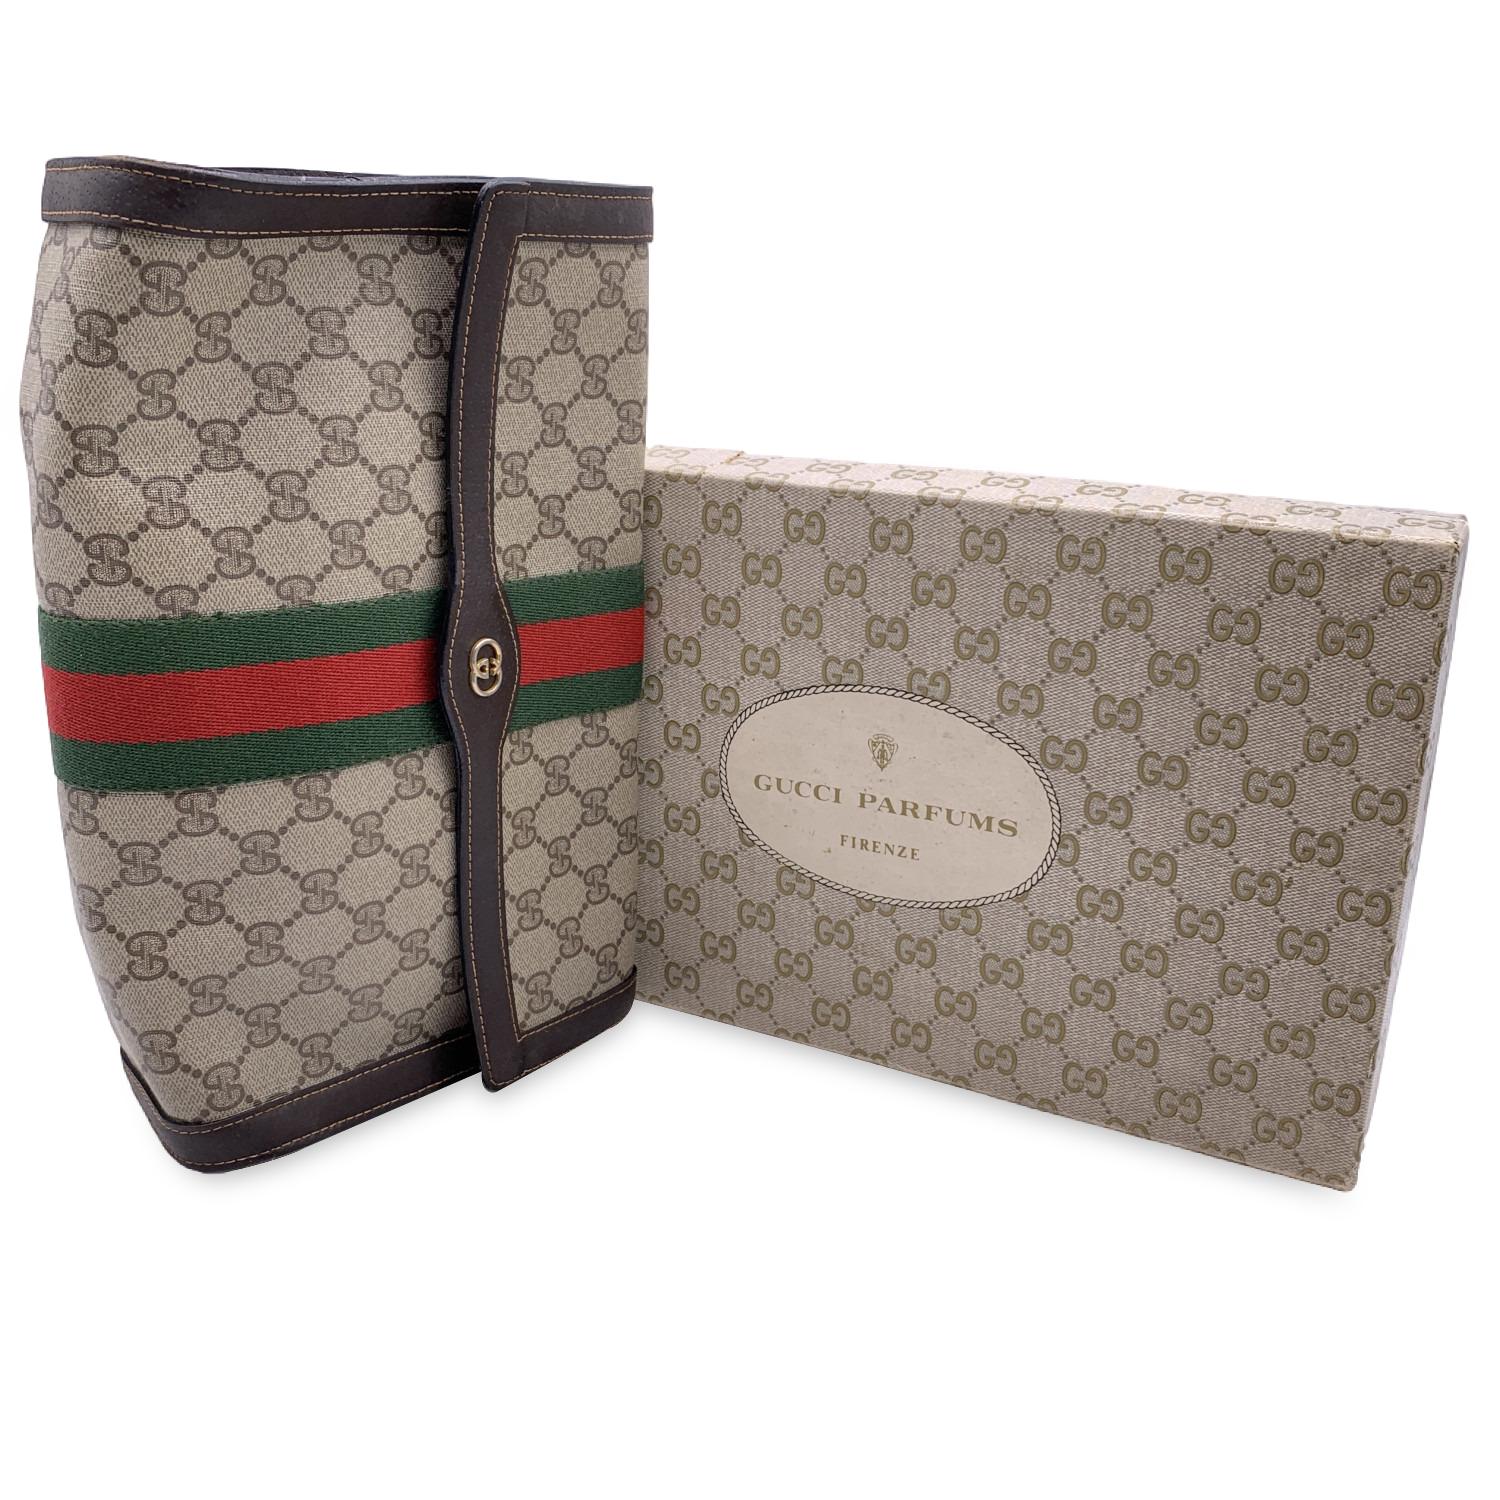 Gucci Vintage flap cosmetic bag with stripes. Beige monogram canvas with Brown genuine Leather trim. Green/Red/Green stripes around the bag. Gold metal GG - GUCCI logo on the front. Flap with button closure on the front. Waterproof lining. 'GUCCI